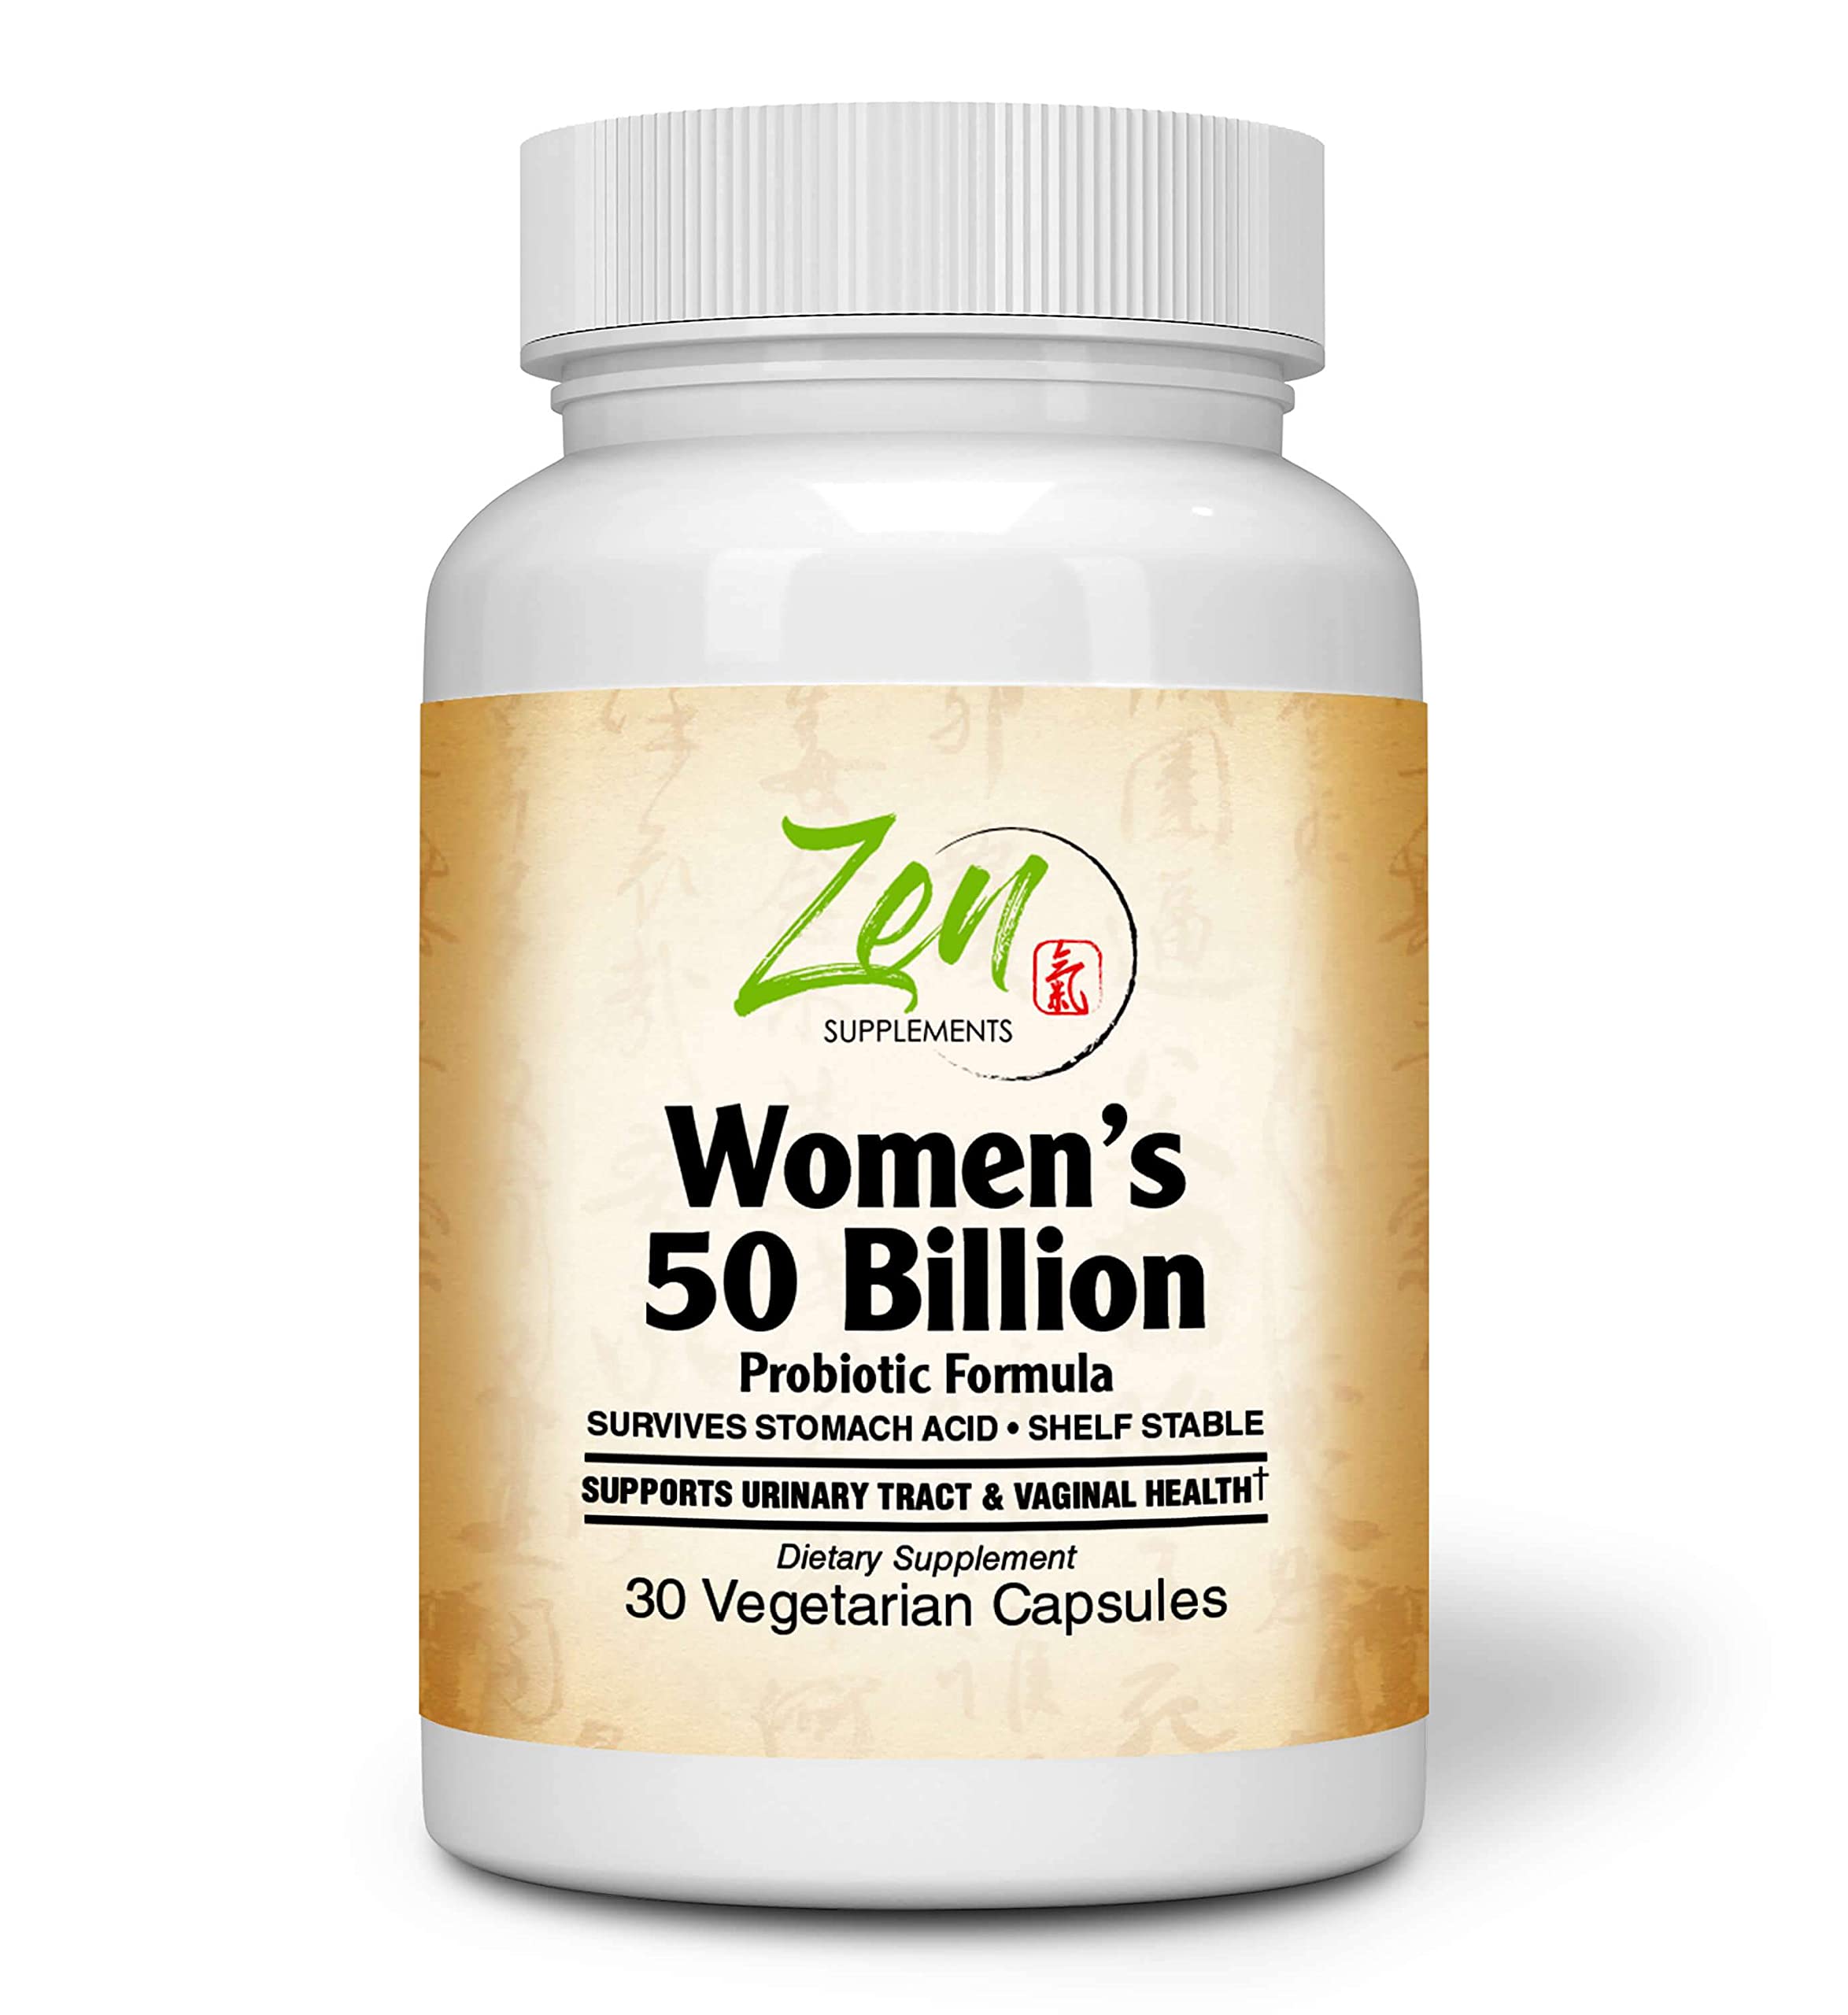 Zen Supplements - Womens 50 Billion Probiotic Formula - Supports Urinary and Vaginal Health with Lactobacilli & Bifado Blended Strains Survives Stomach Acid, Shelf Stable 30-Vegcaps